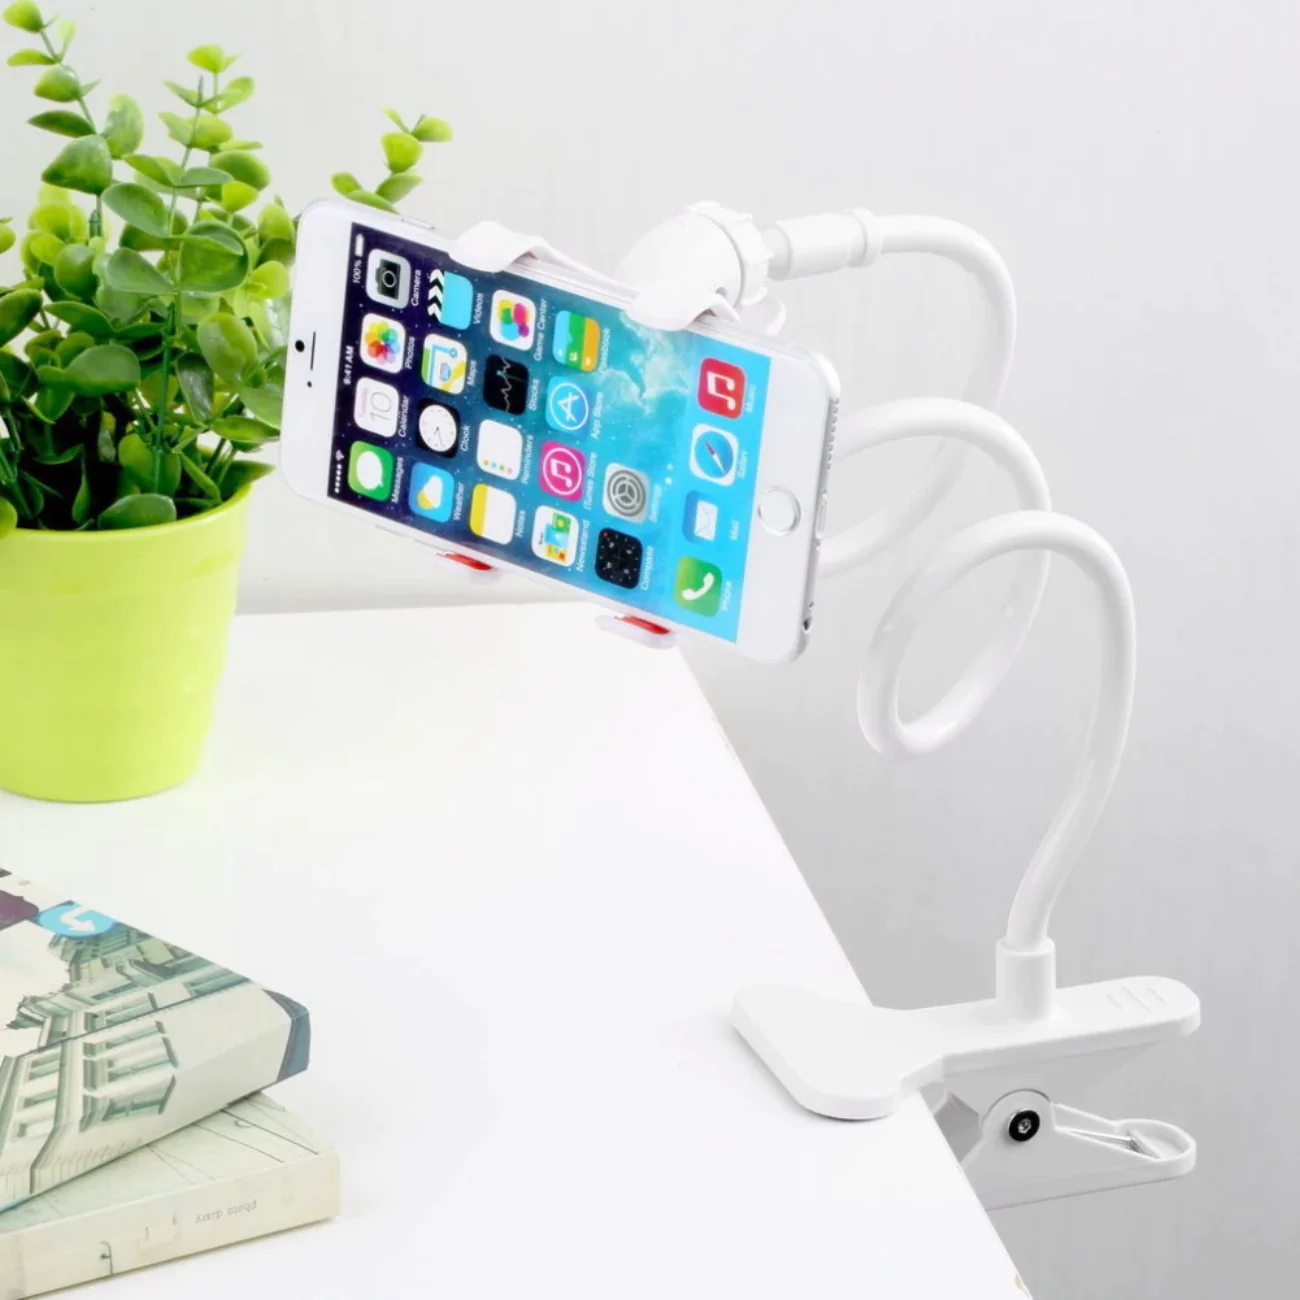 Upgrade Your Smartphone Experience with Innovative Accessory